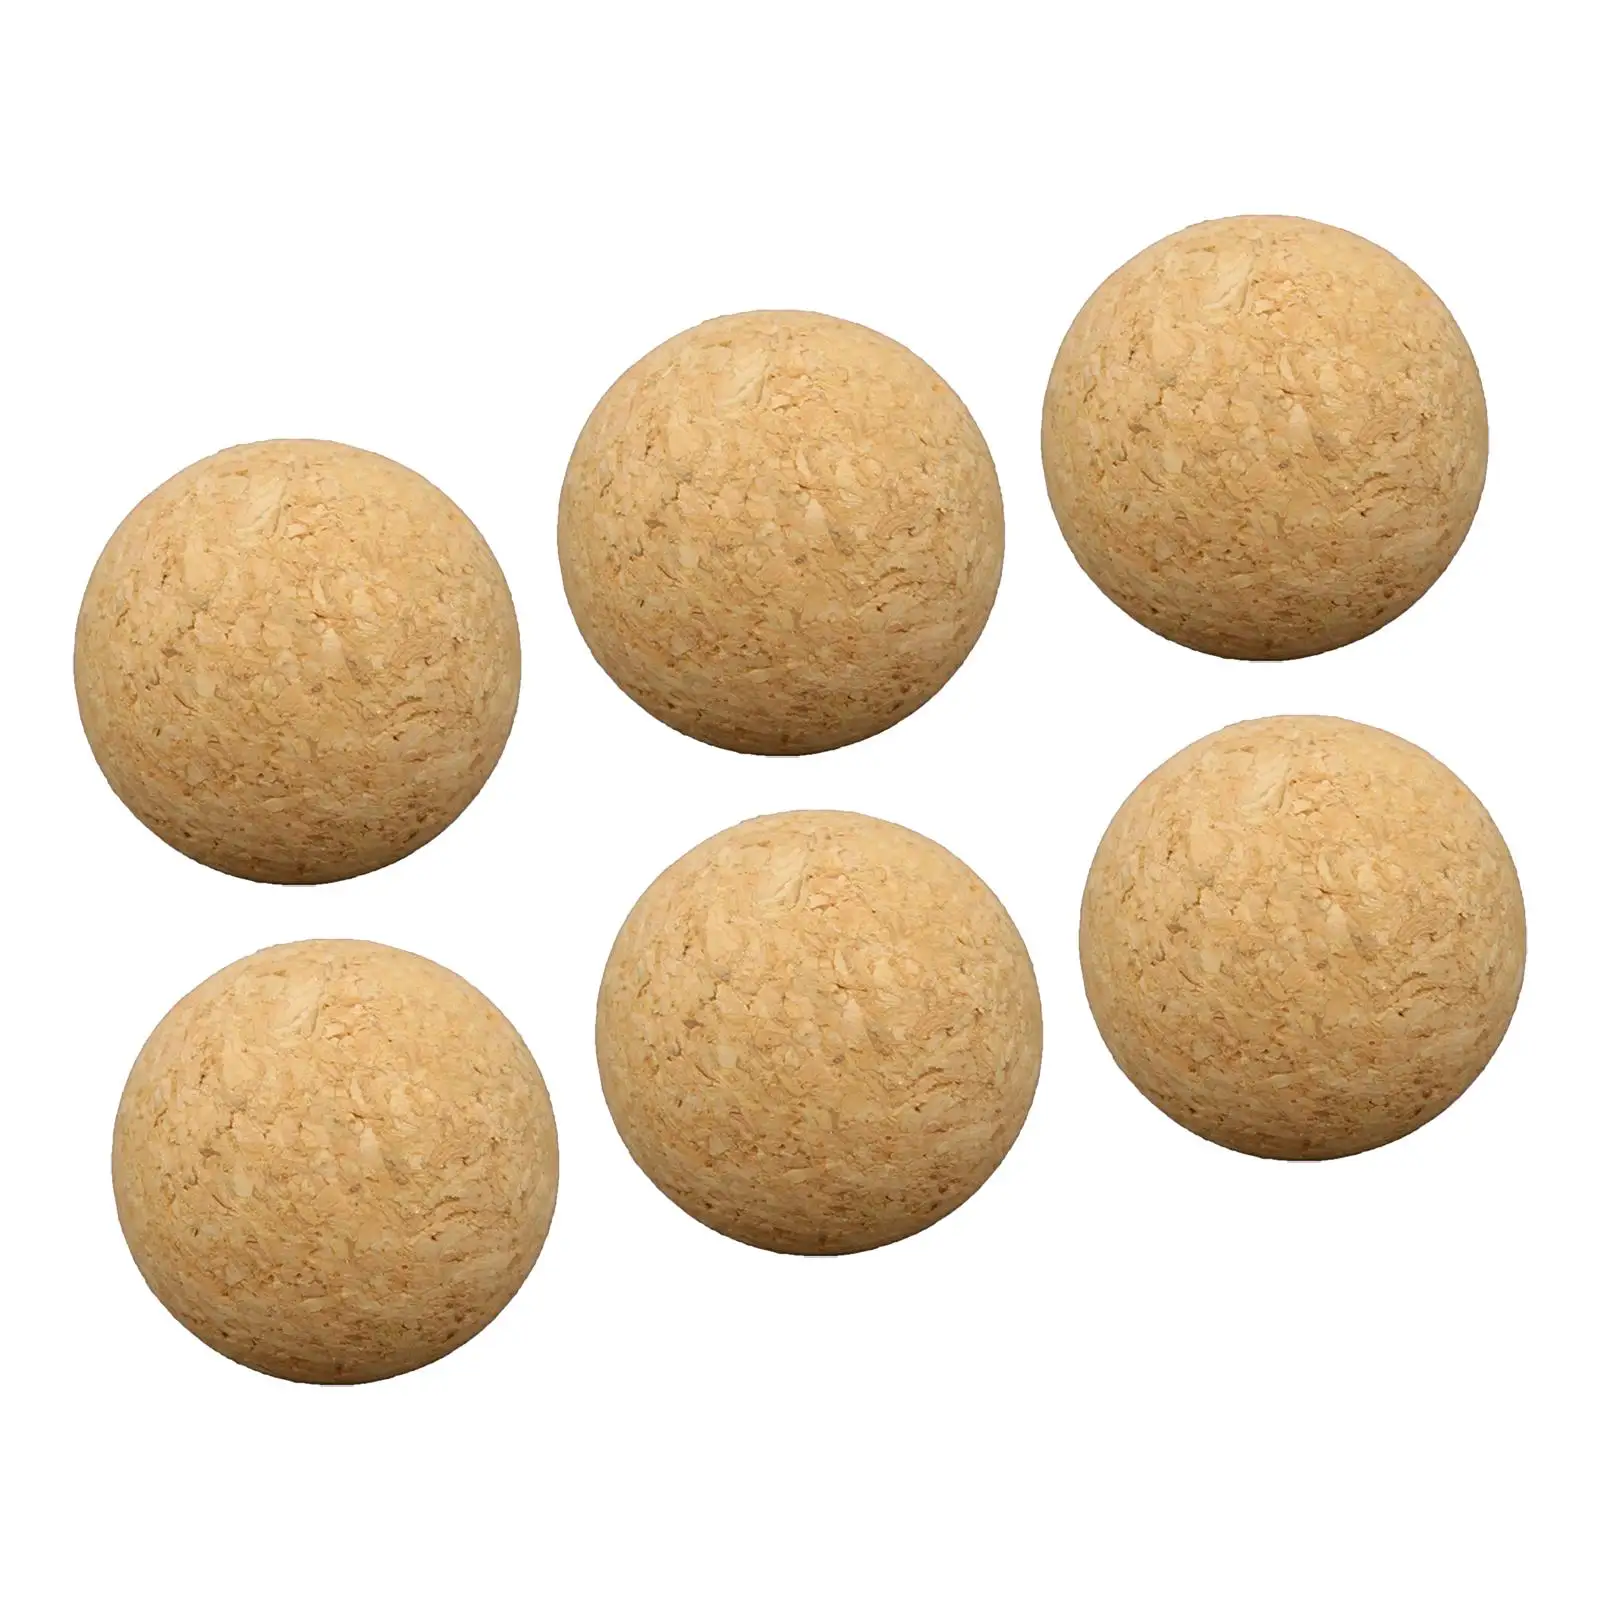 6 Pieces Table Football Cork Game Football Machine Replacement Accessories